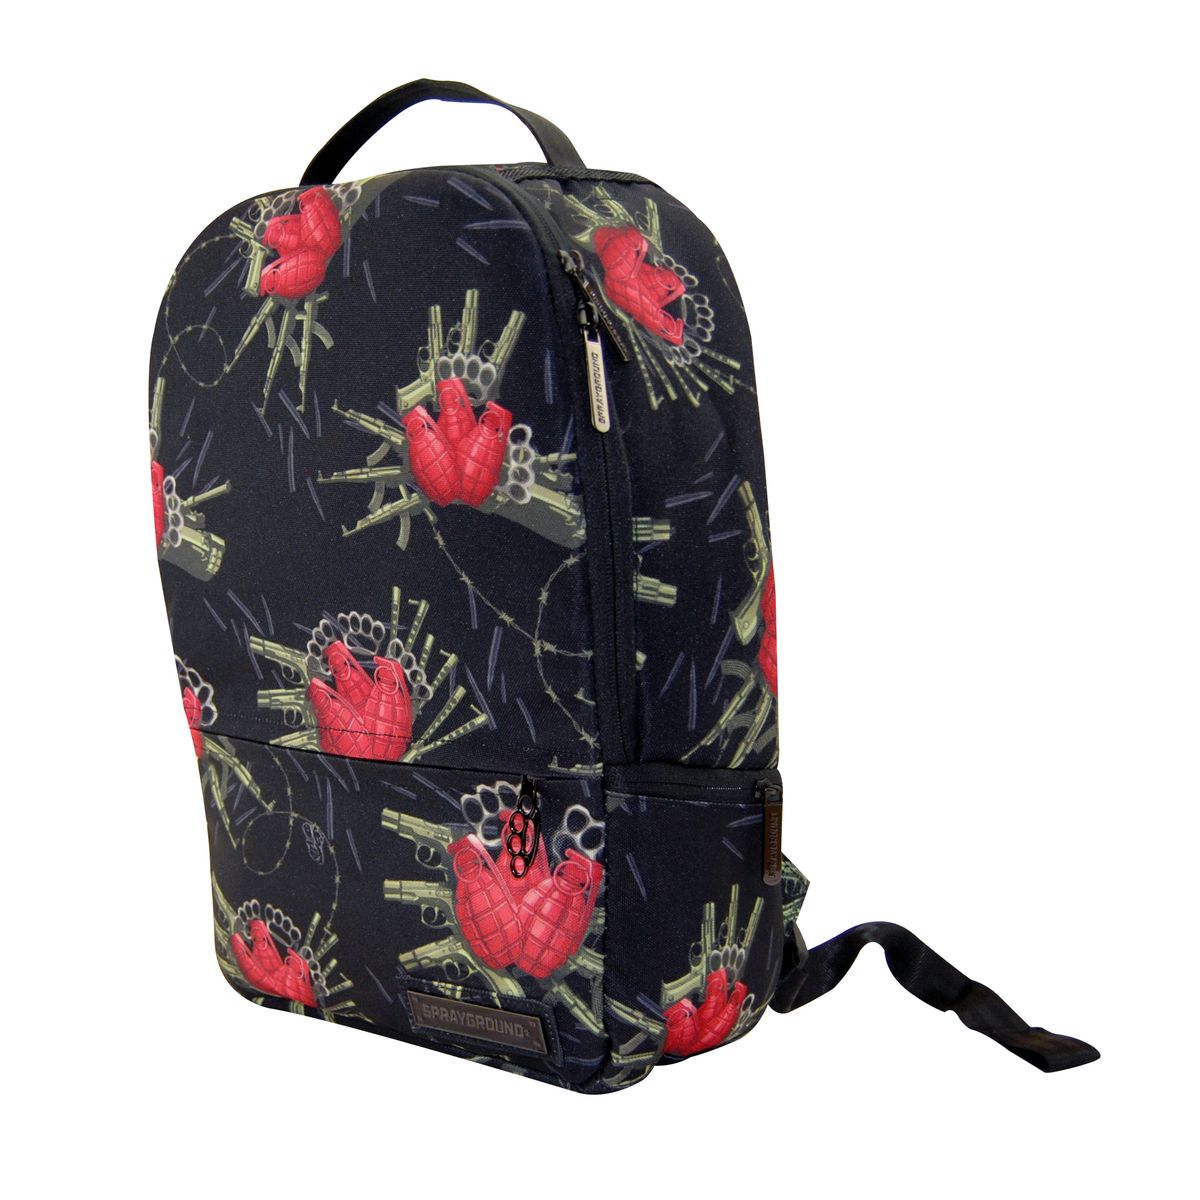 Photos - Backpack Private Label Fashion Patterned  - Flower Bomb BP003